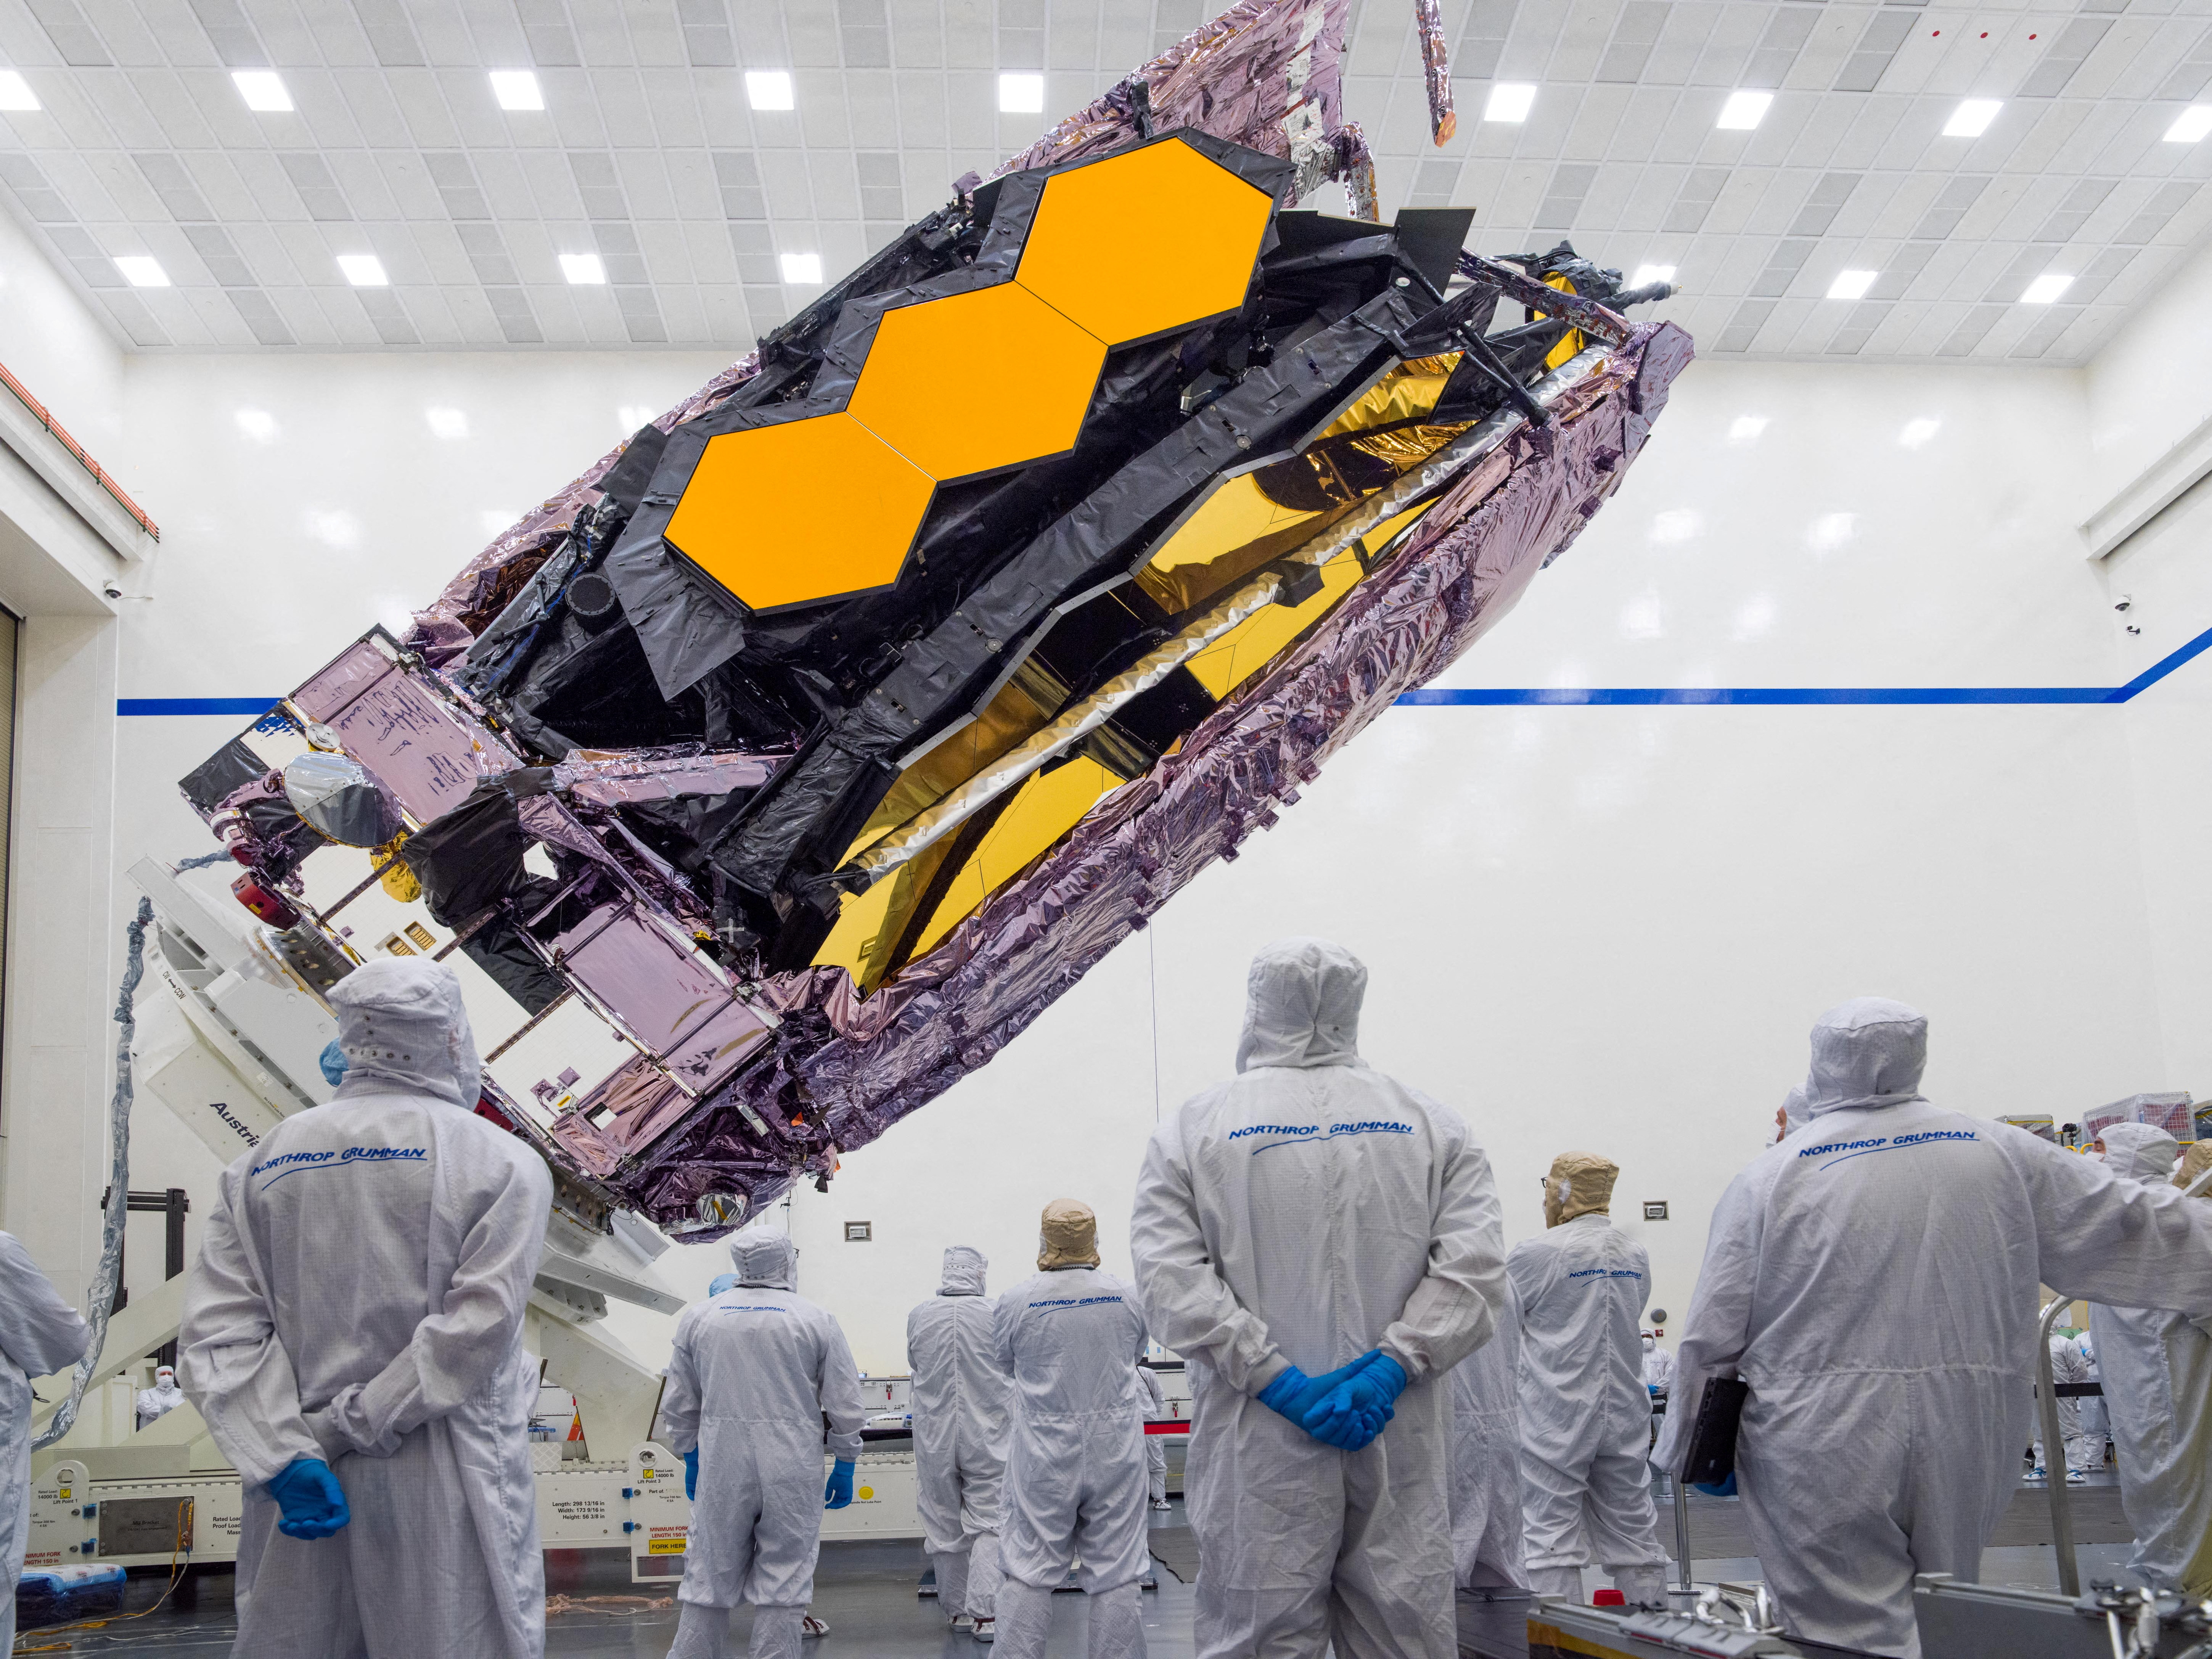 The James Webb Space Telescope is packed up for shipment to its launch site in Kourou, French Guiana